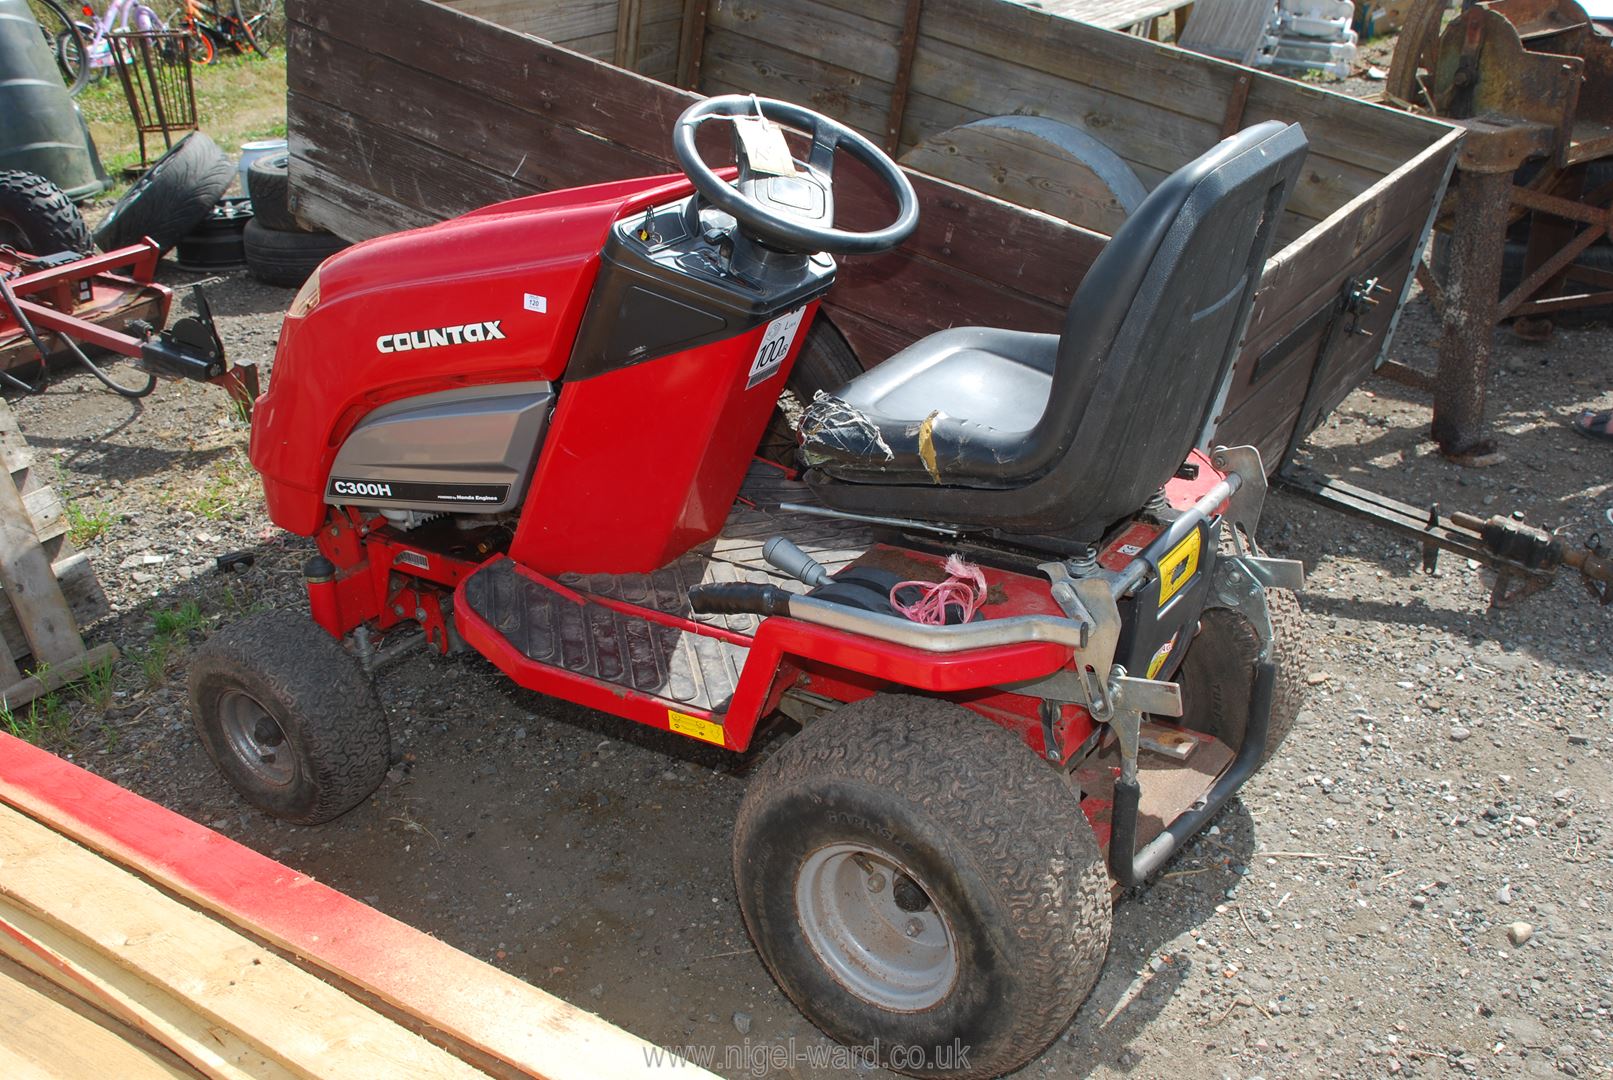 A 'Countax' ride-on tractor/mower (model no: C300H) with electric-start Honda V-twin engine,